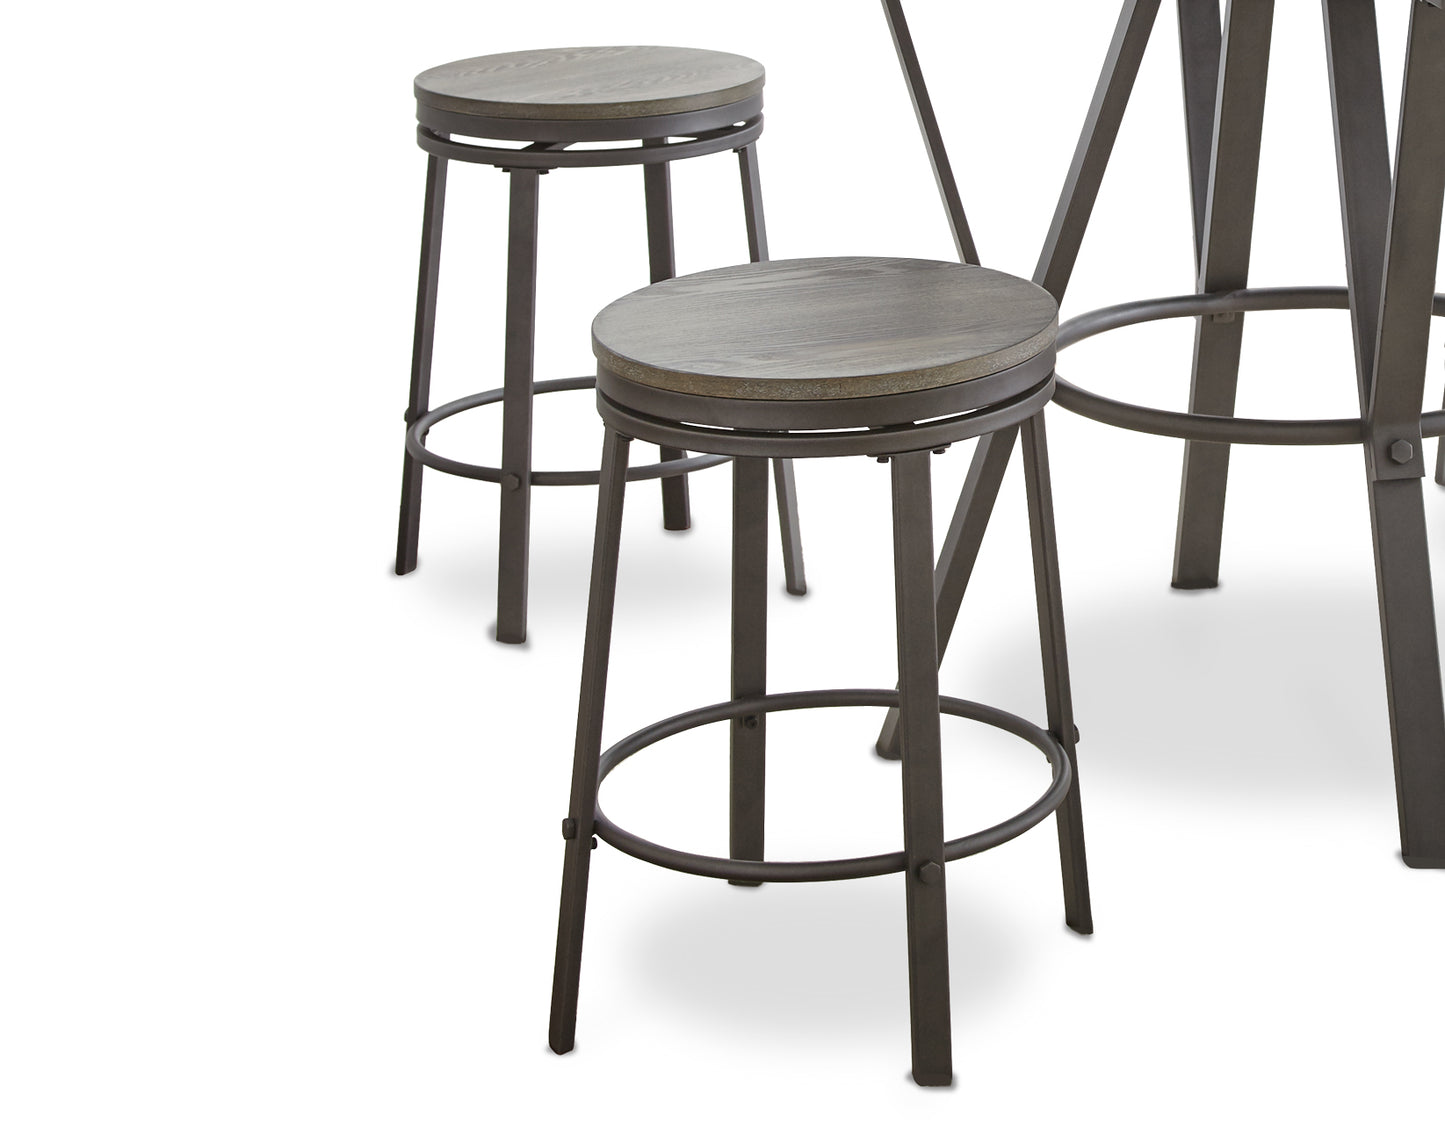 Portland 5 Piece 42-inch Round Counter Dining Set
(Table & 4 Counter Stool’s)